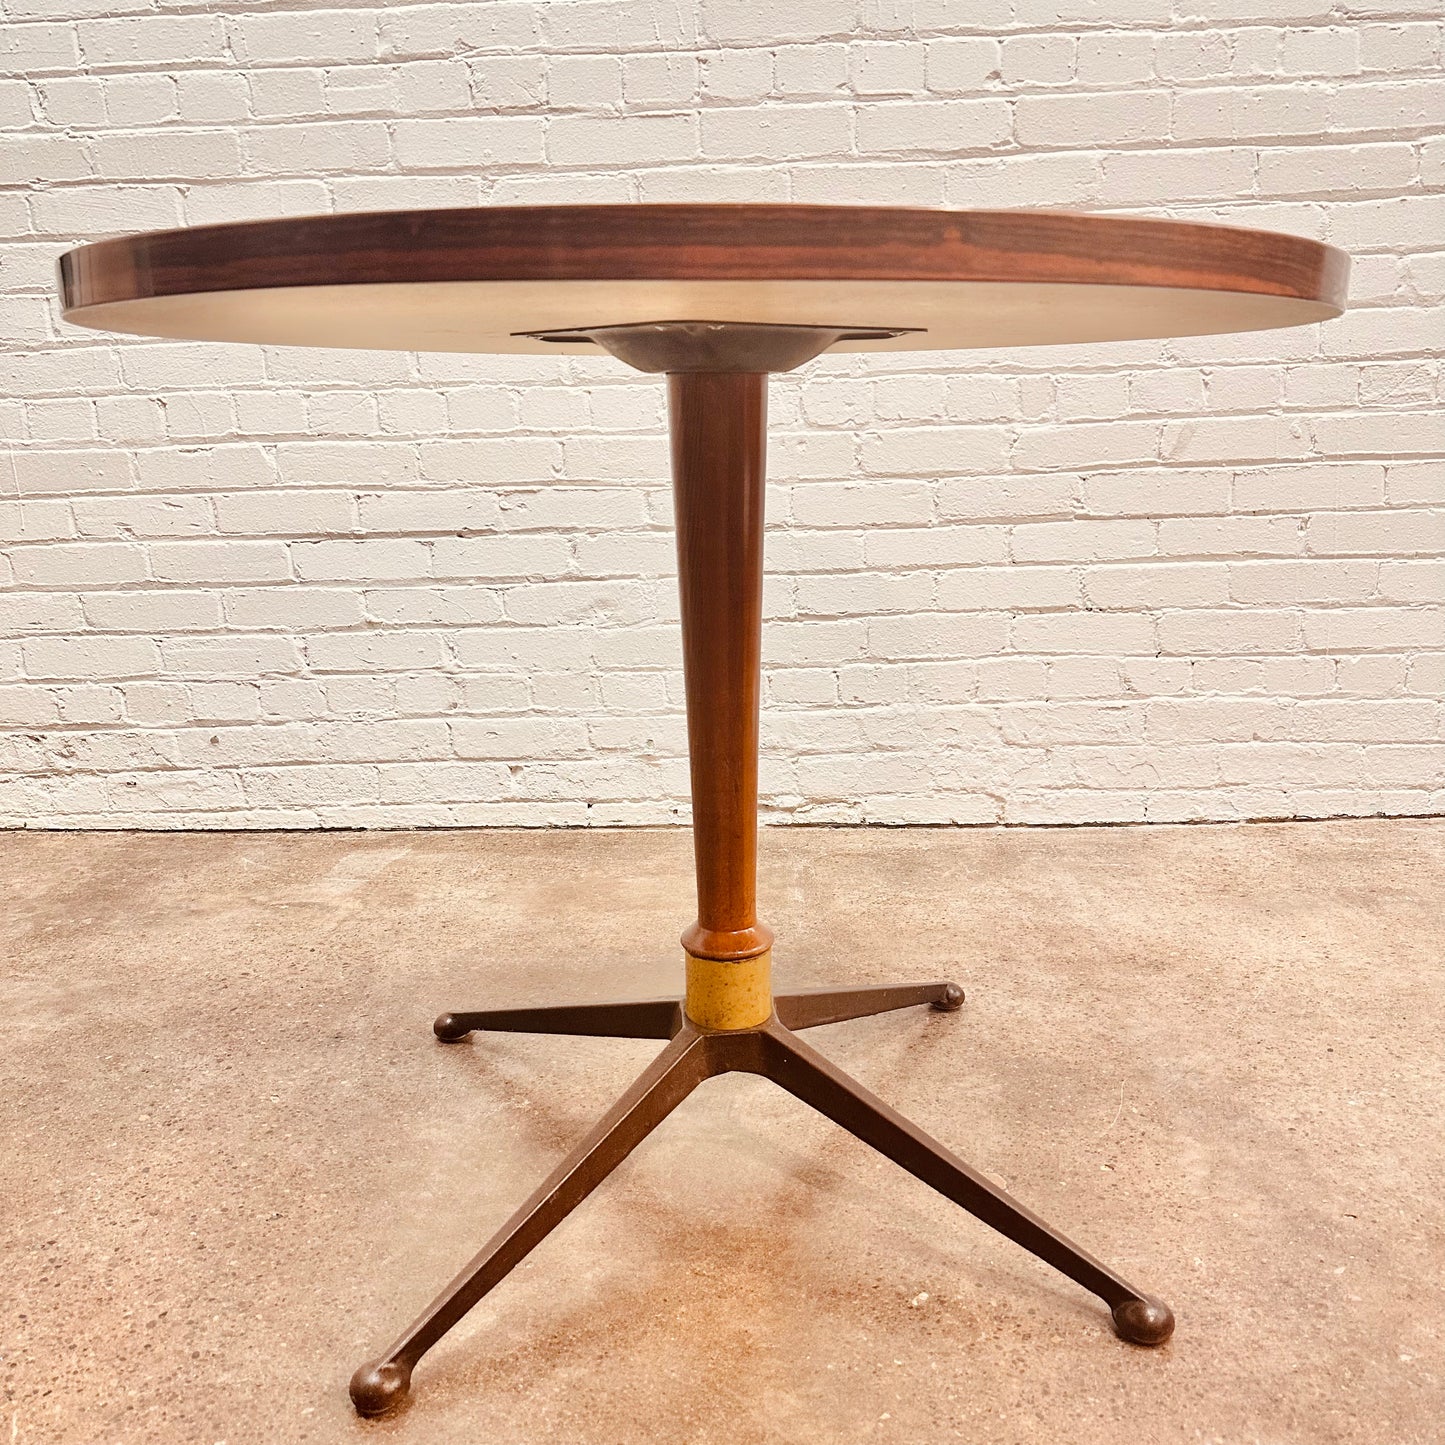 ROUND ROSEWOOD LAMINATE 36” CAFE TABLE W/ STEEL LEGS